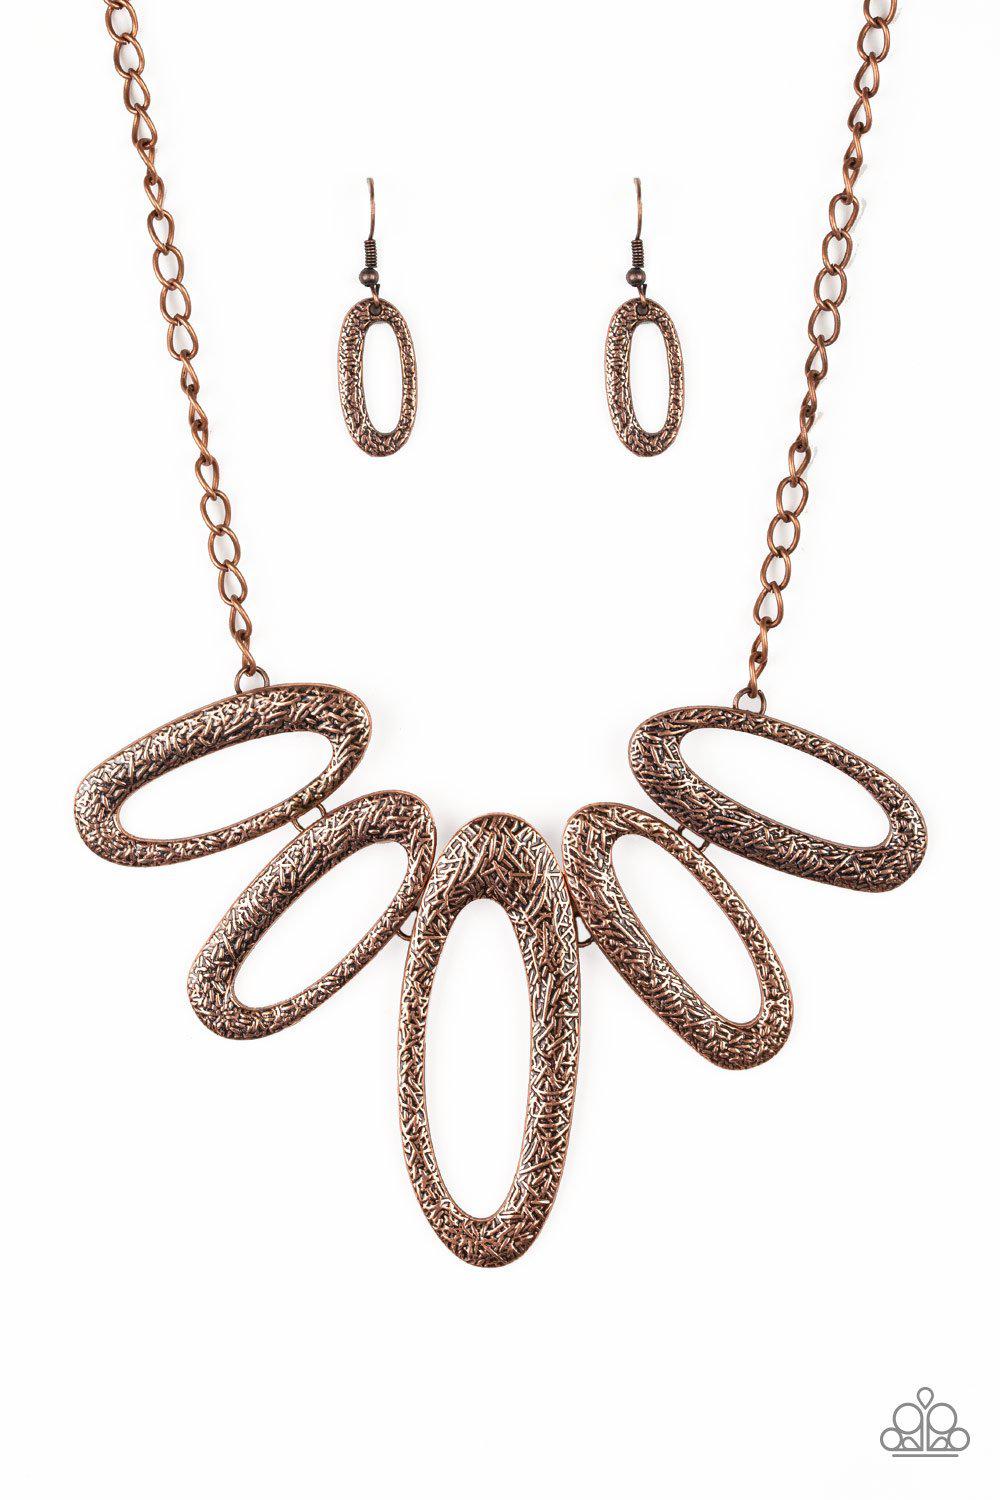 Easy Tigress Copper Necklace - Paparazzi Accessories-CarasShop.com - $5 Jewelry by Cara Jewels